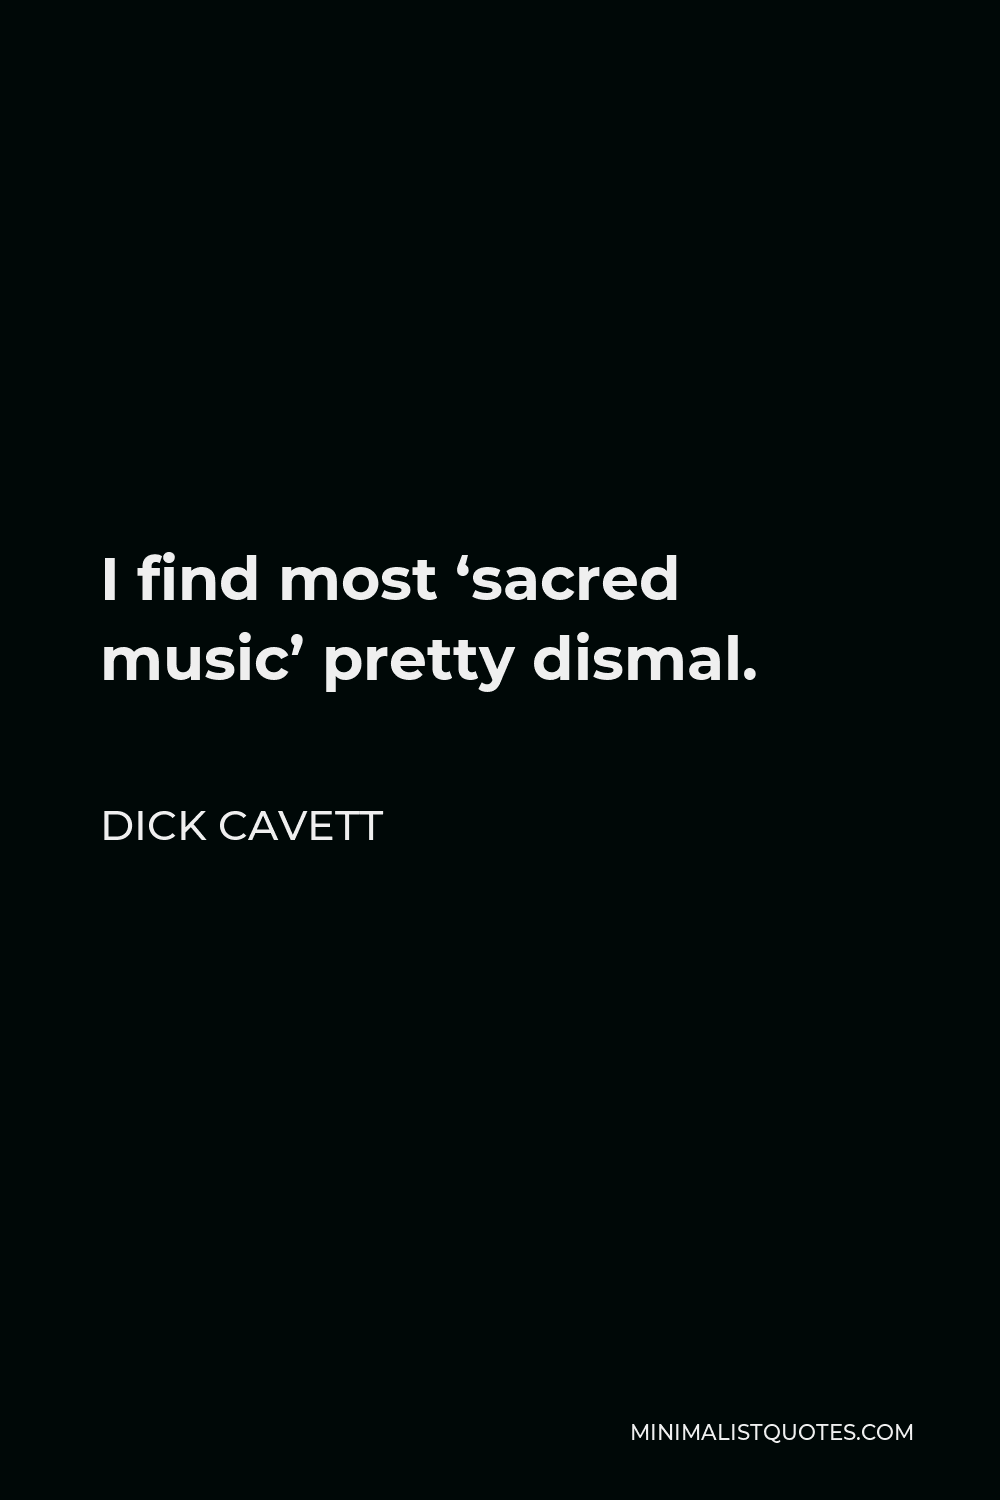 Dick Cavett Quote - I find most ‘sacred music’ pretty dismal.